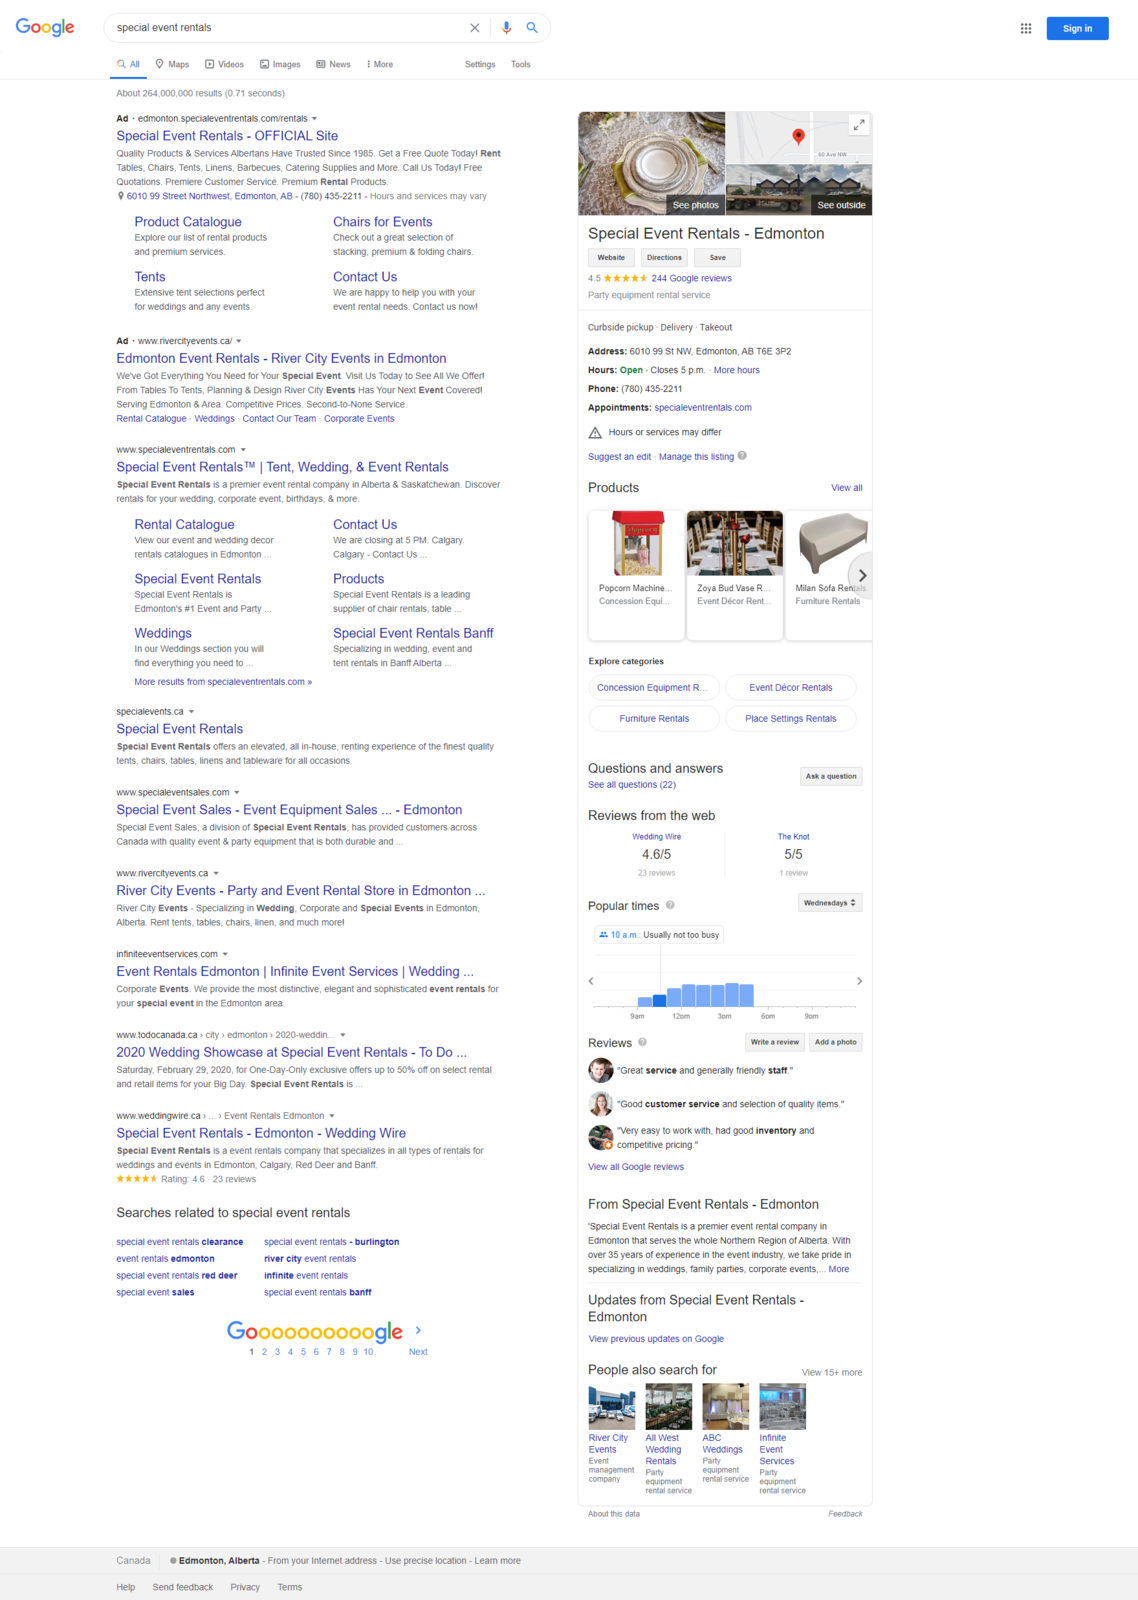 screencapture-google-search-2020-08-26-09_59_39.png